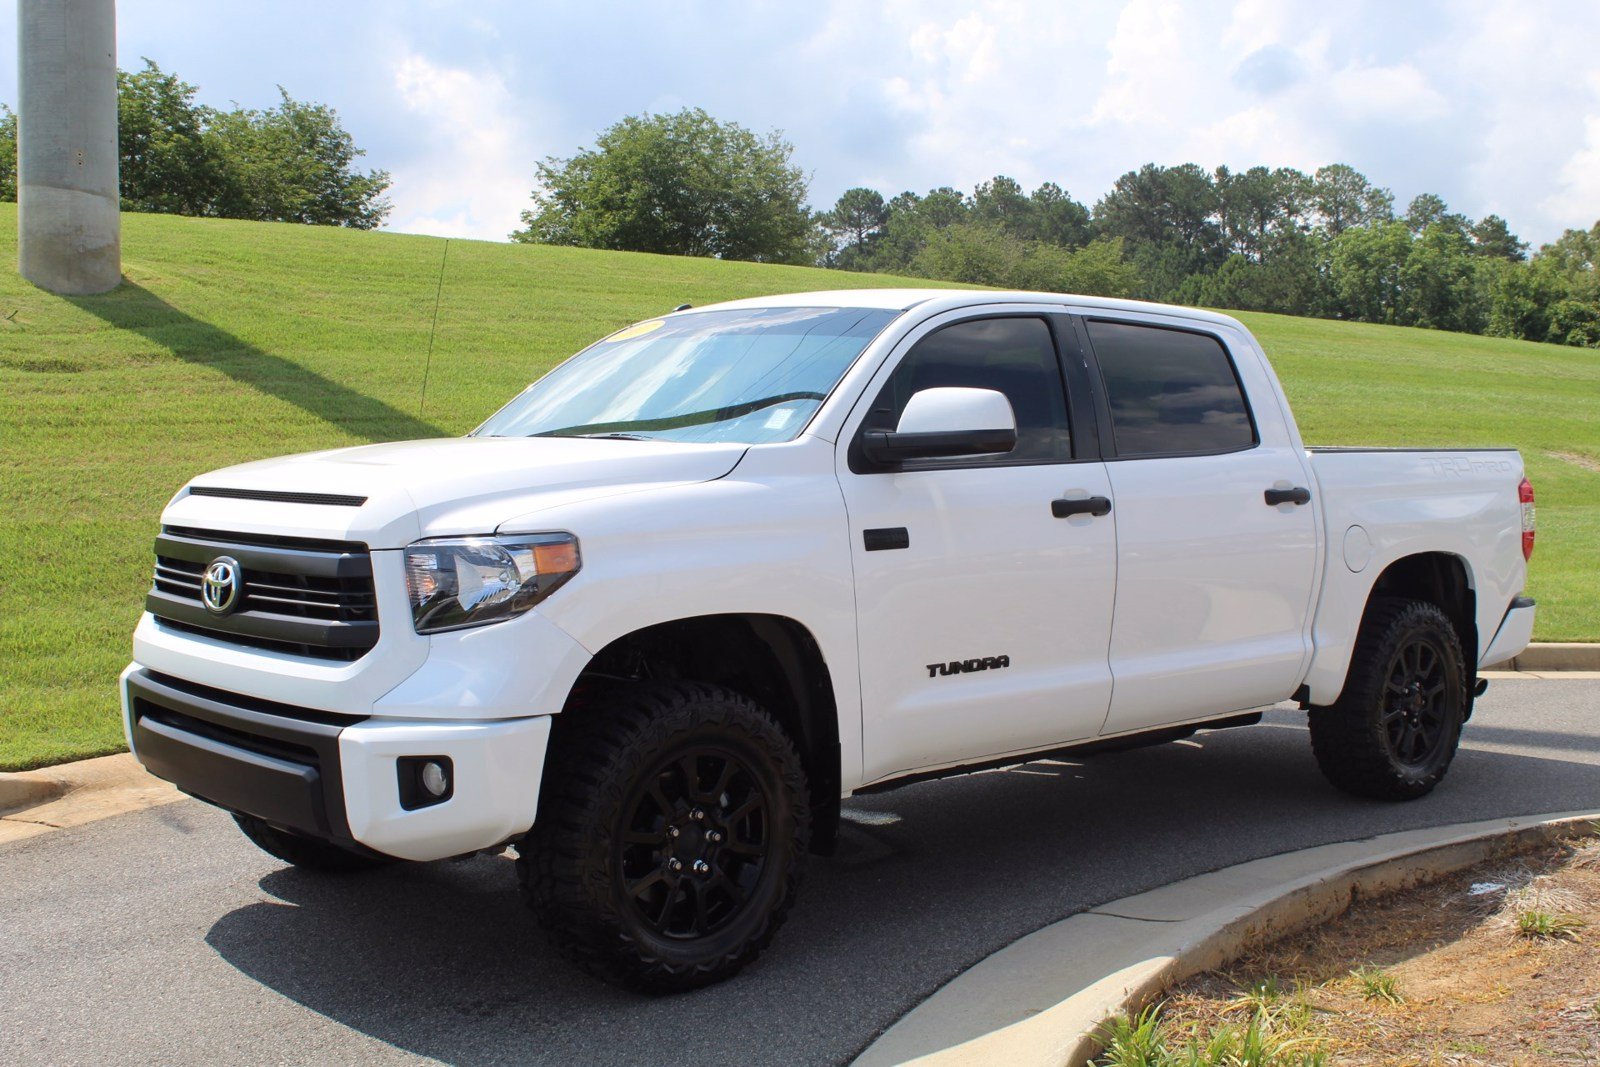 Pre-Owned 2017 Toyota Tundra 4WD TRD Pro Crew Cab Pickup in Macon #